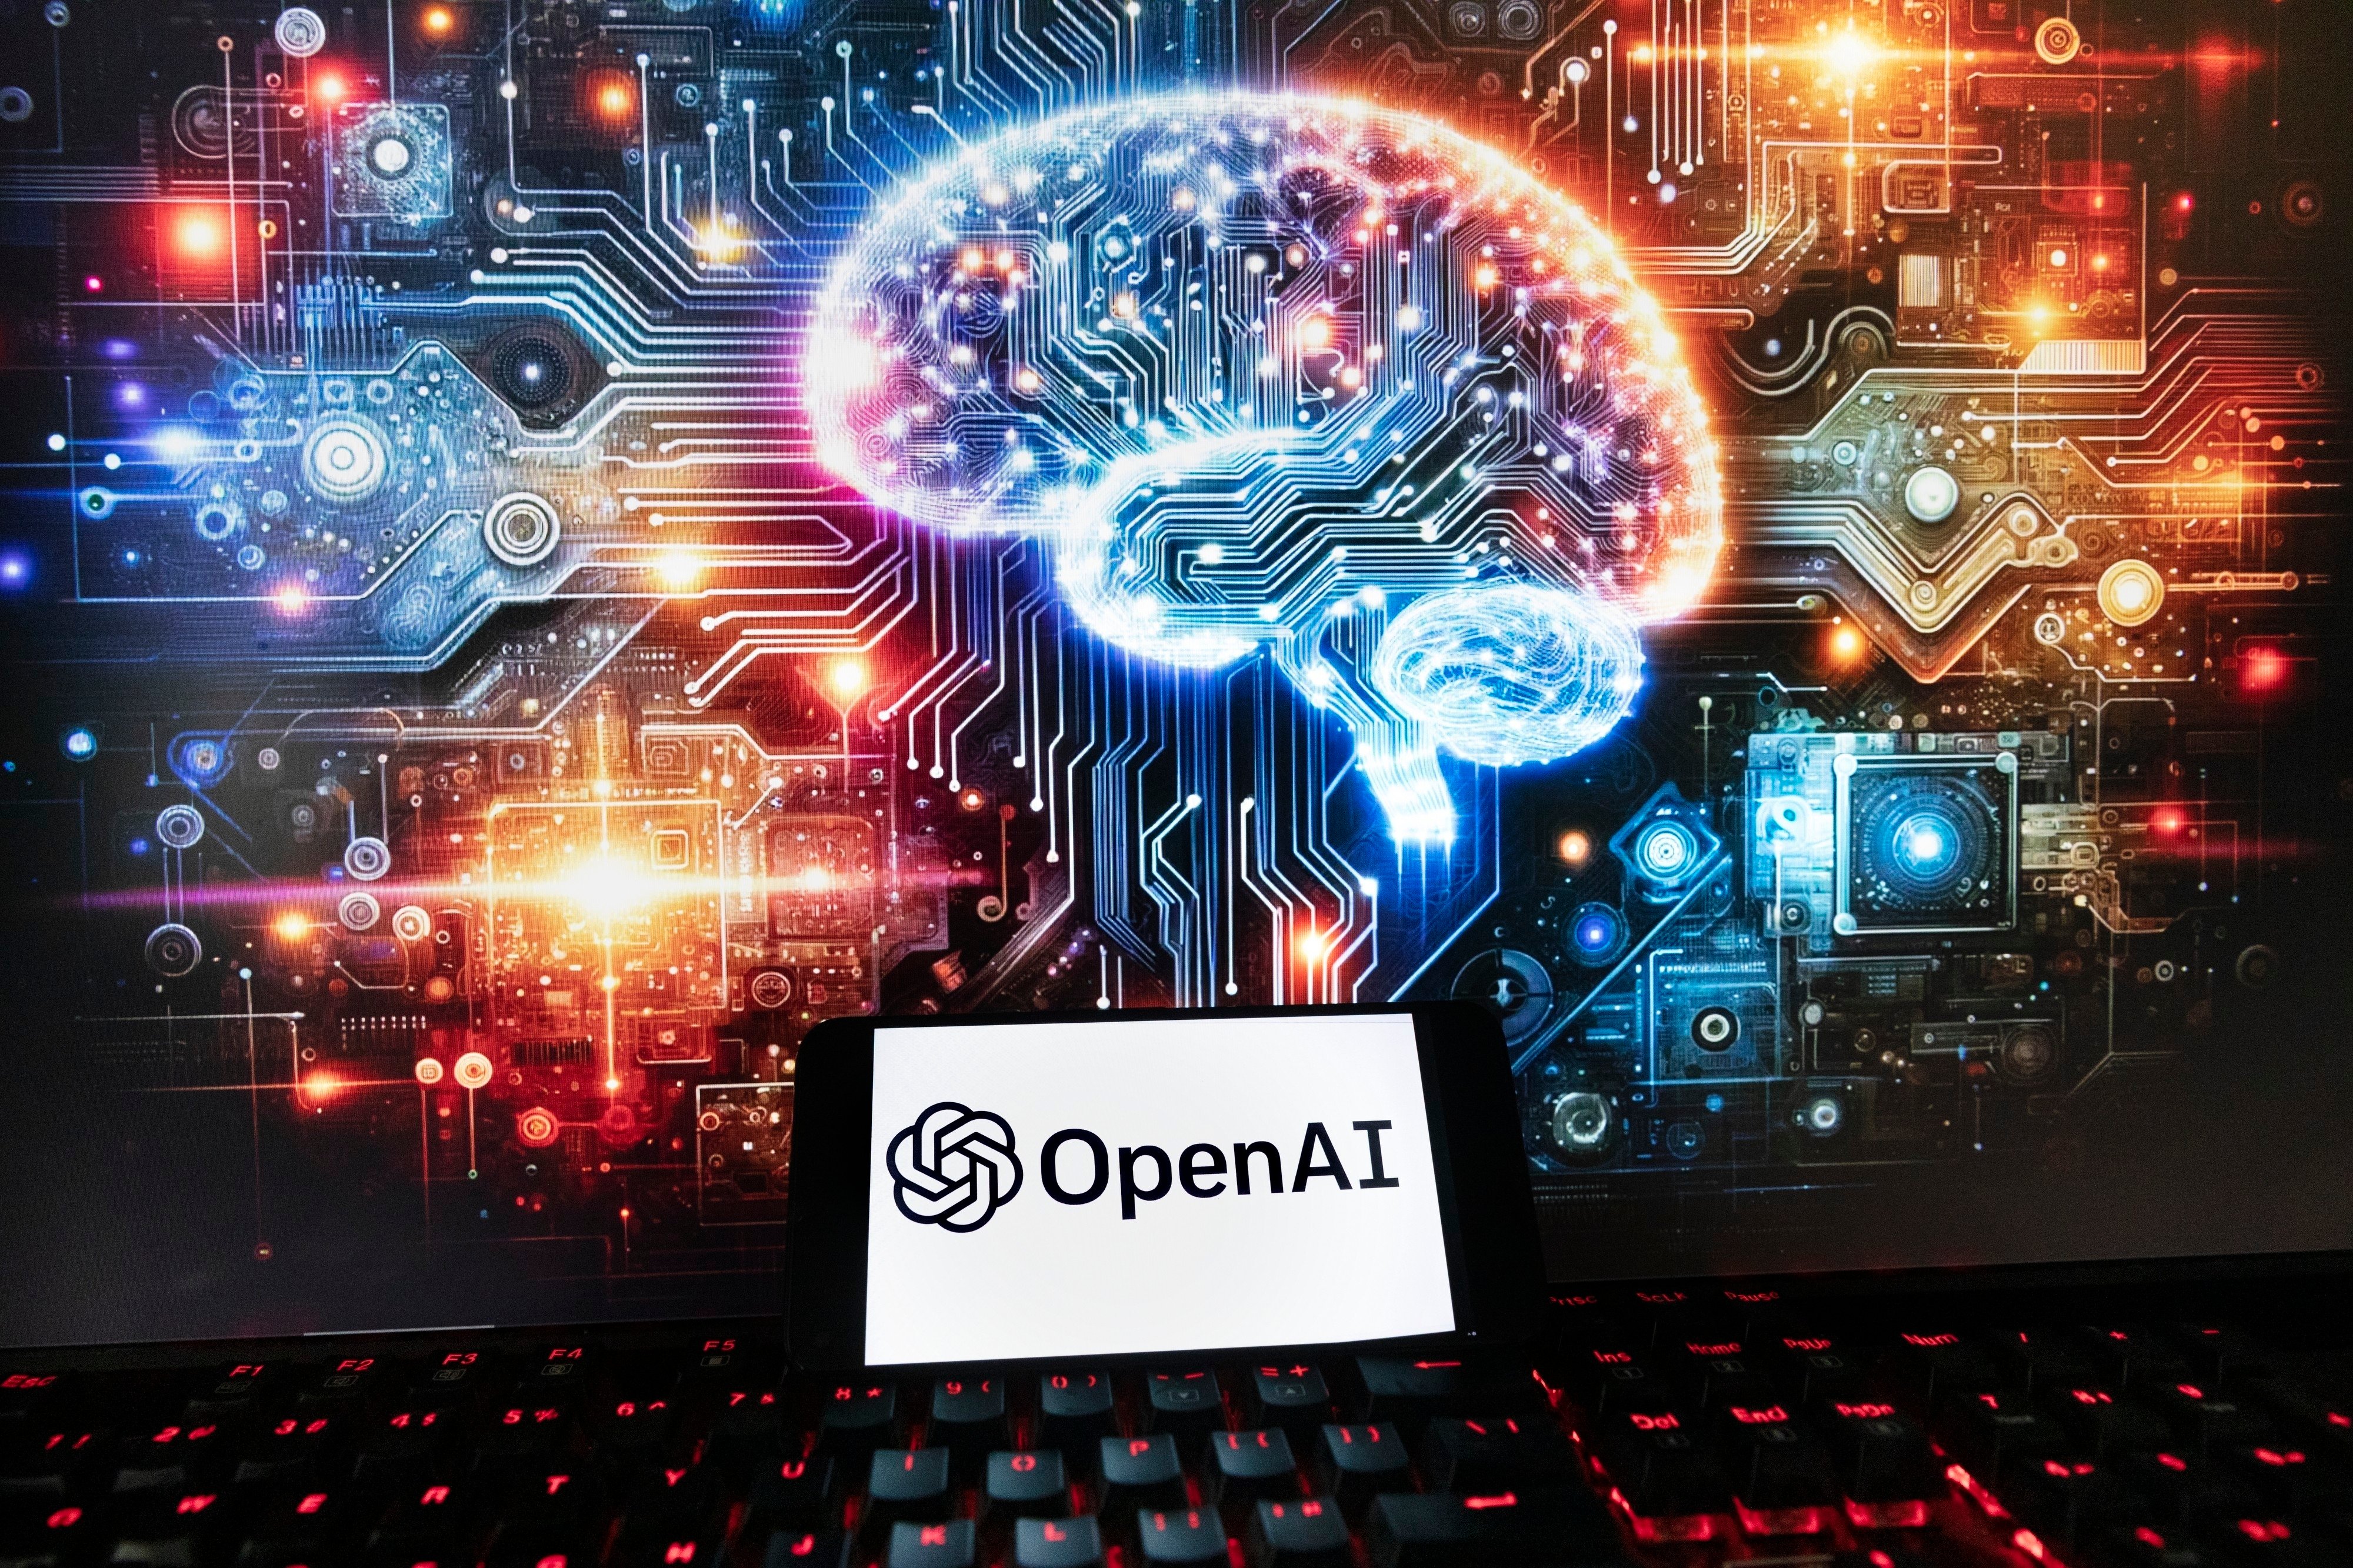 The OpenAI logo is displayed on a smartphone with an image on a computer monitor generated by ChatGPT’s Dall-E text-to-image model, Dec. 8, 2023. Photo: AP